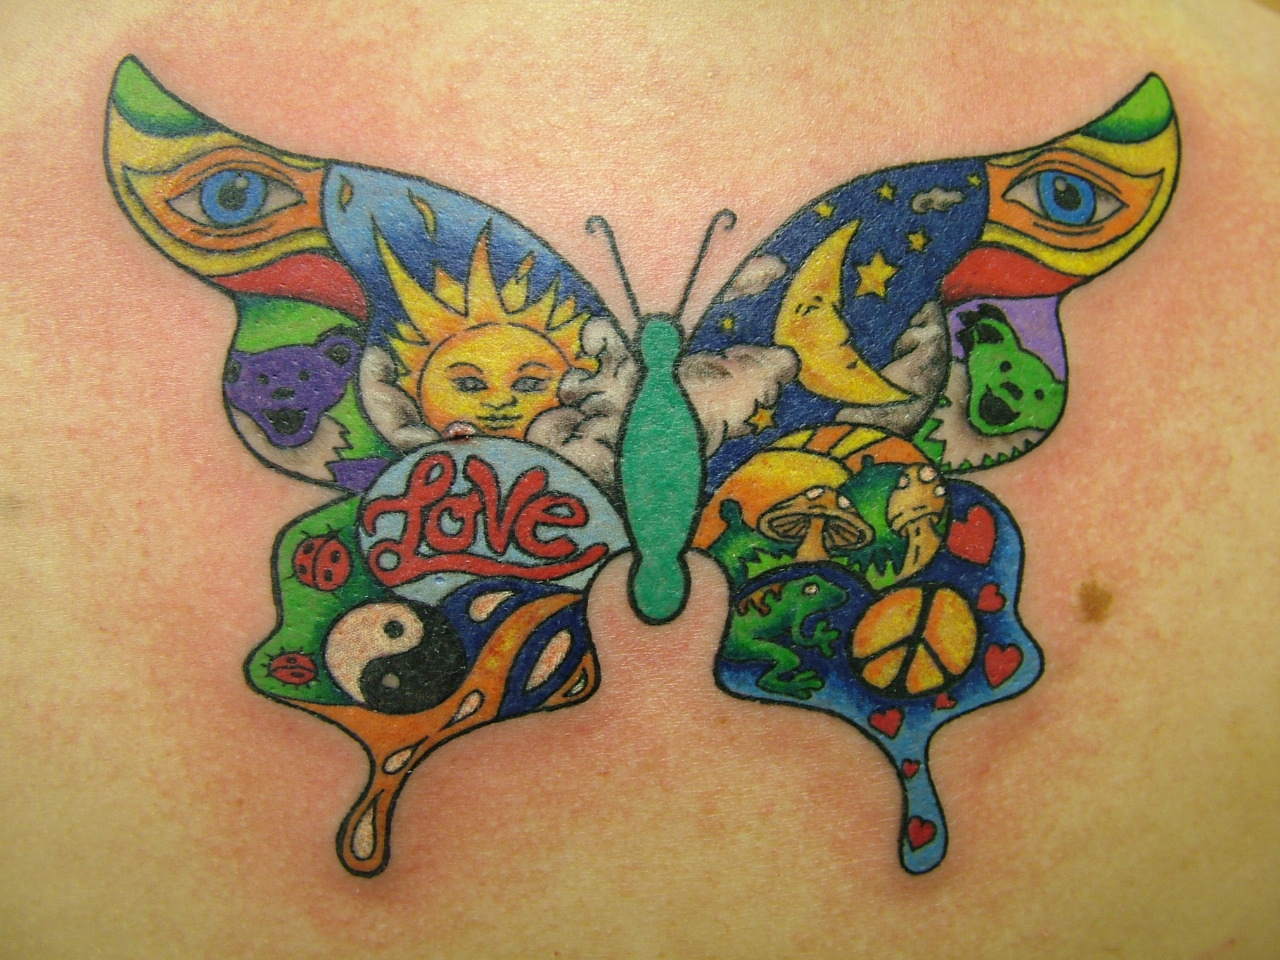 Cute Butterfly Tattoo In The Moon Tattoo Ideas in dimensions 1280 X 960